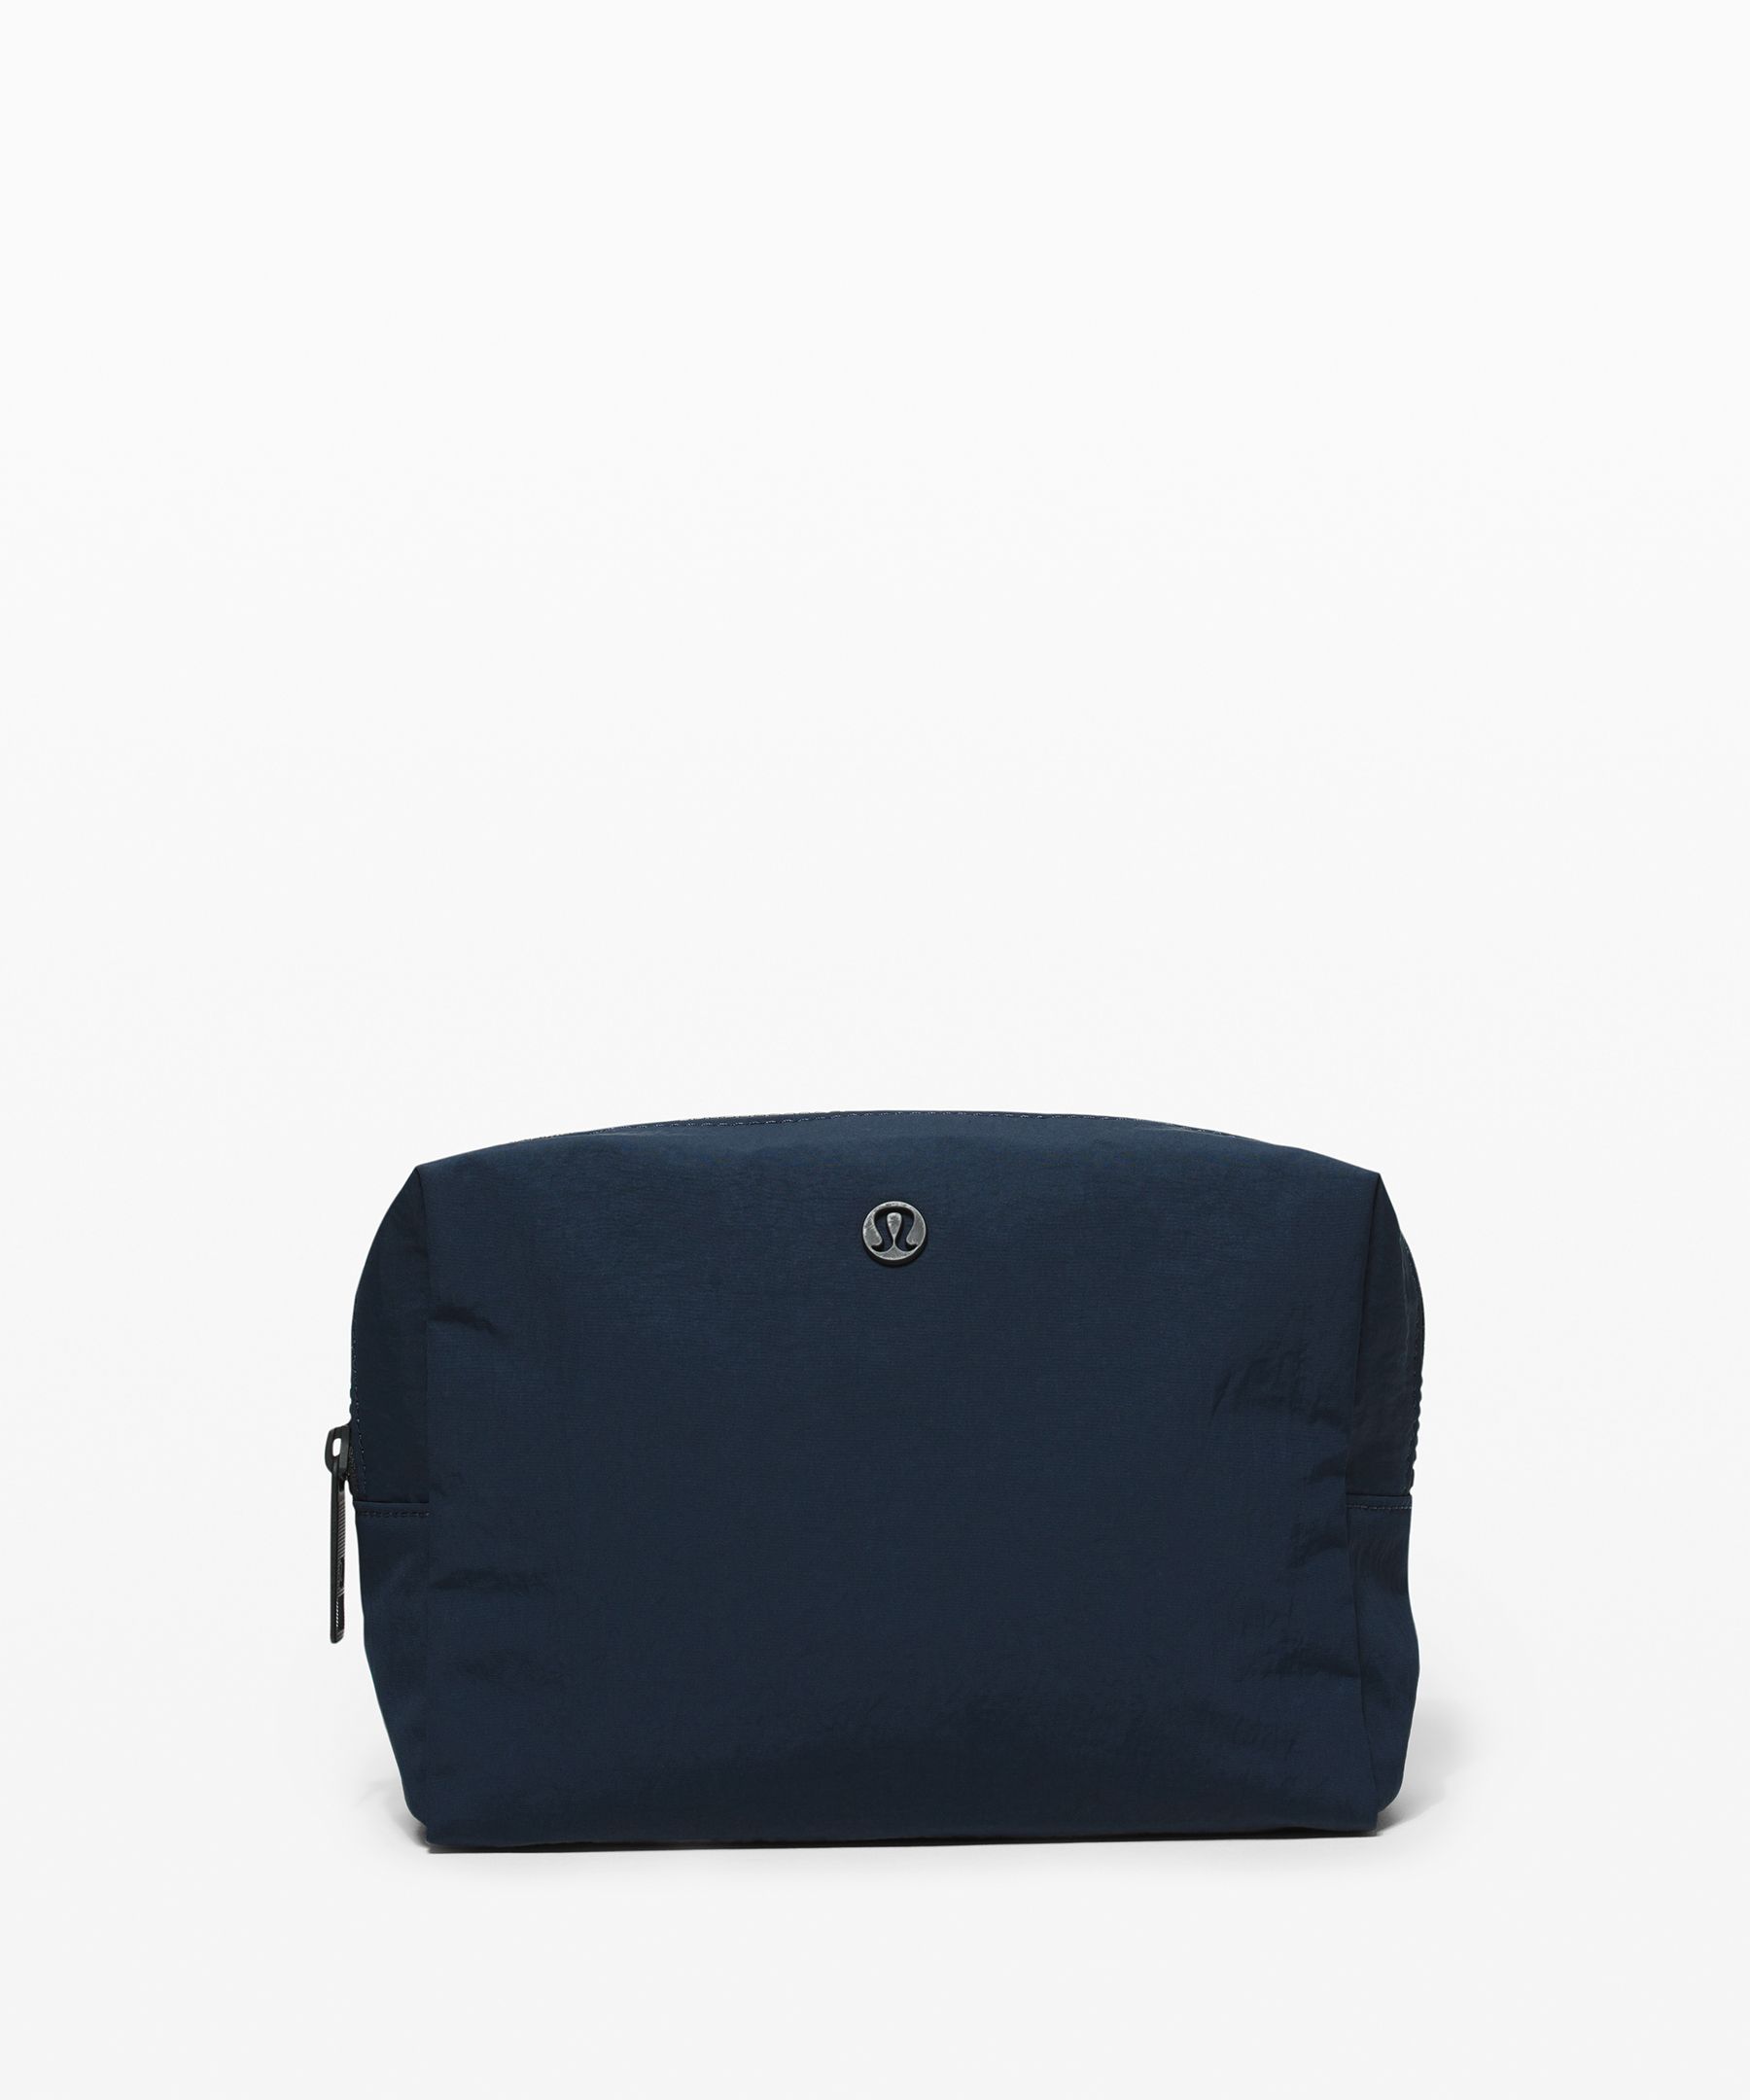 Lululemon All Your Small Things Pouch *4l In True Navy